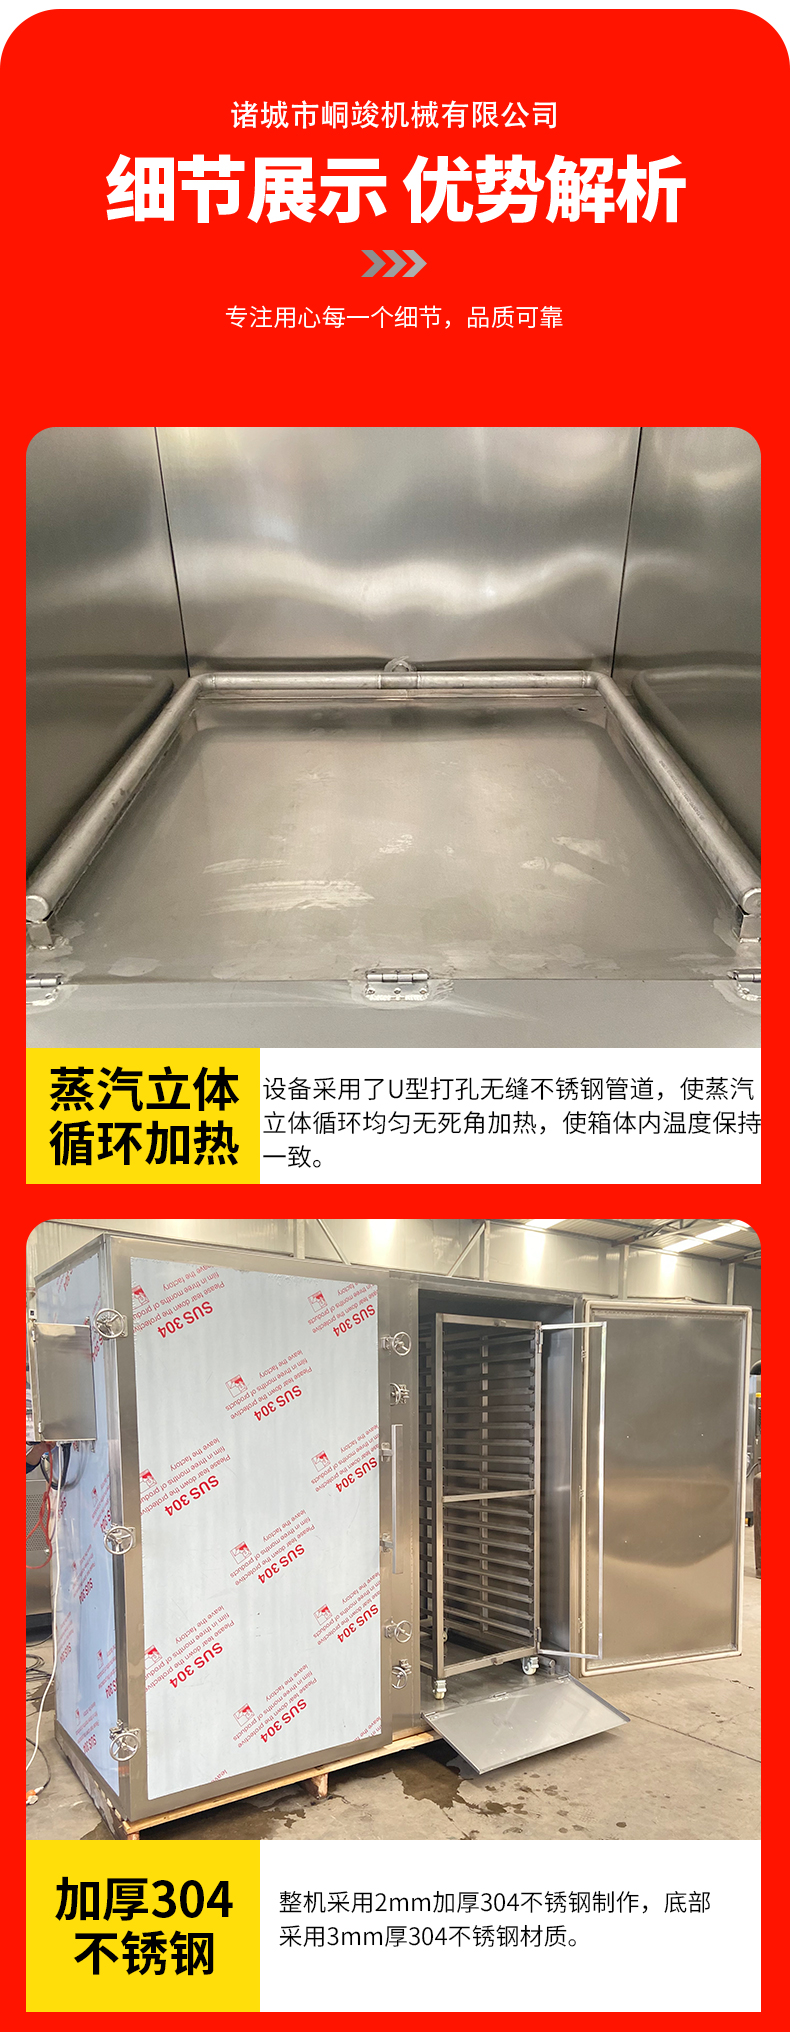 Double door steamer fully automatic large food steamer cabinet multifunctional hotel kitchen steamer cabinet equipment completion